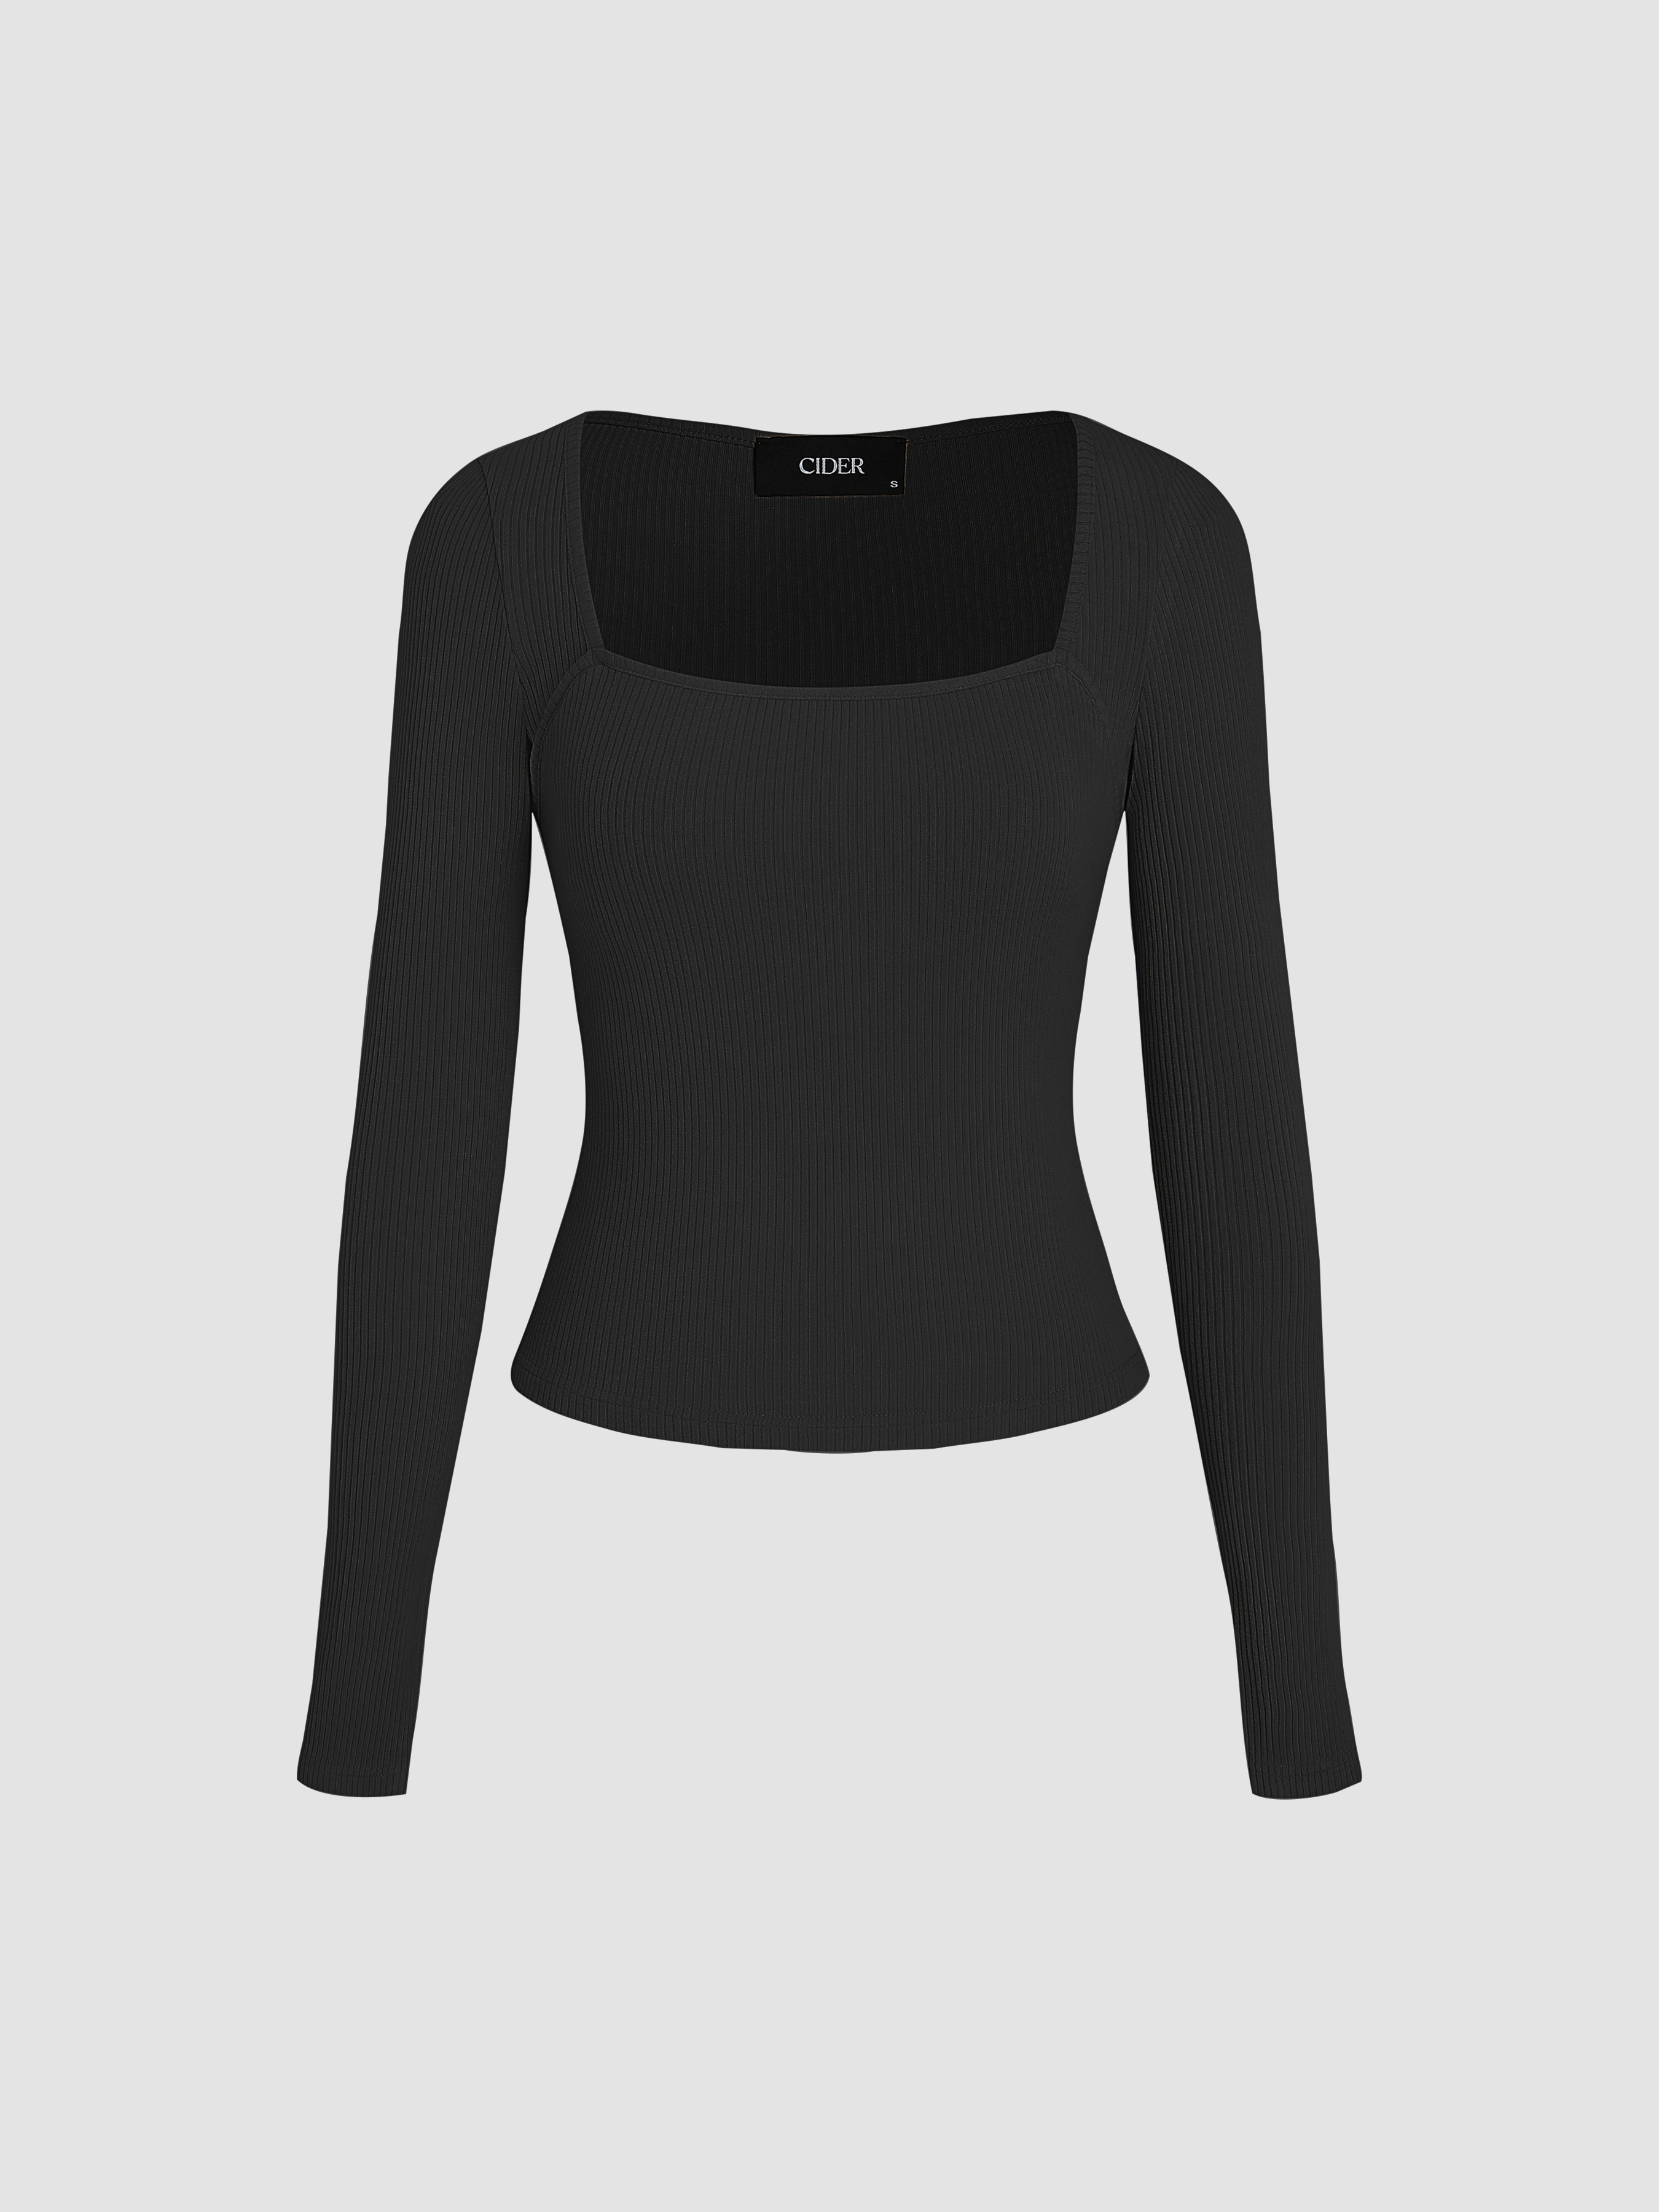 Square Neck Solid Long Sleeve Top - Cider